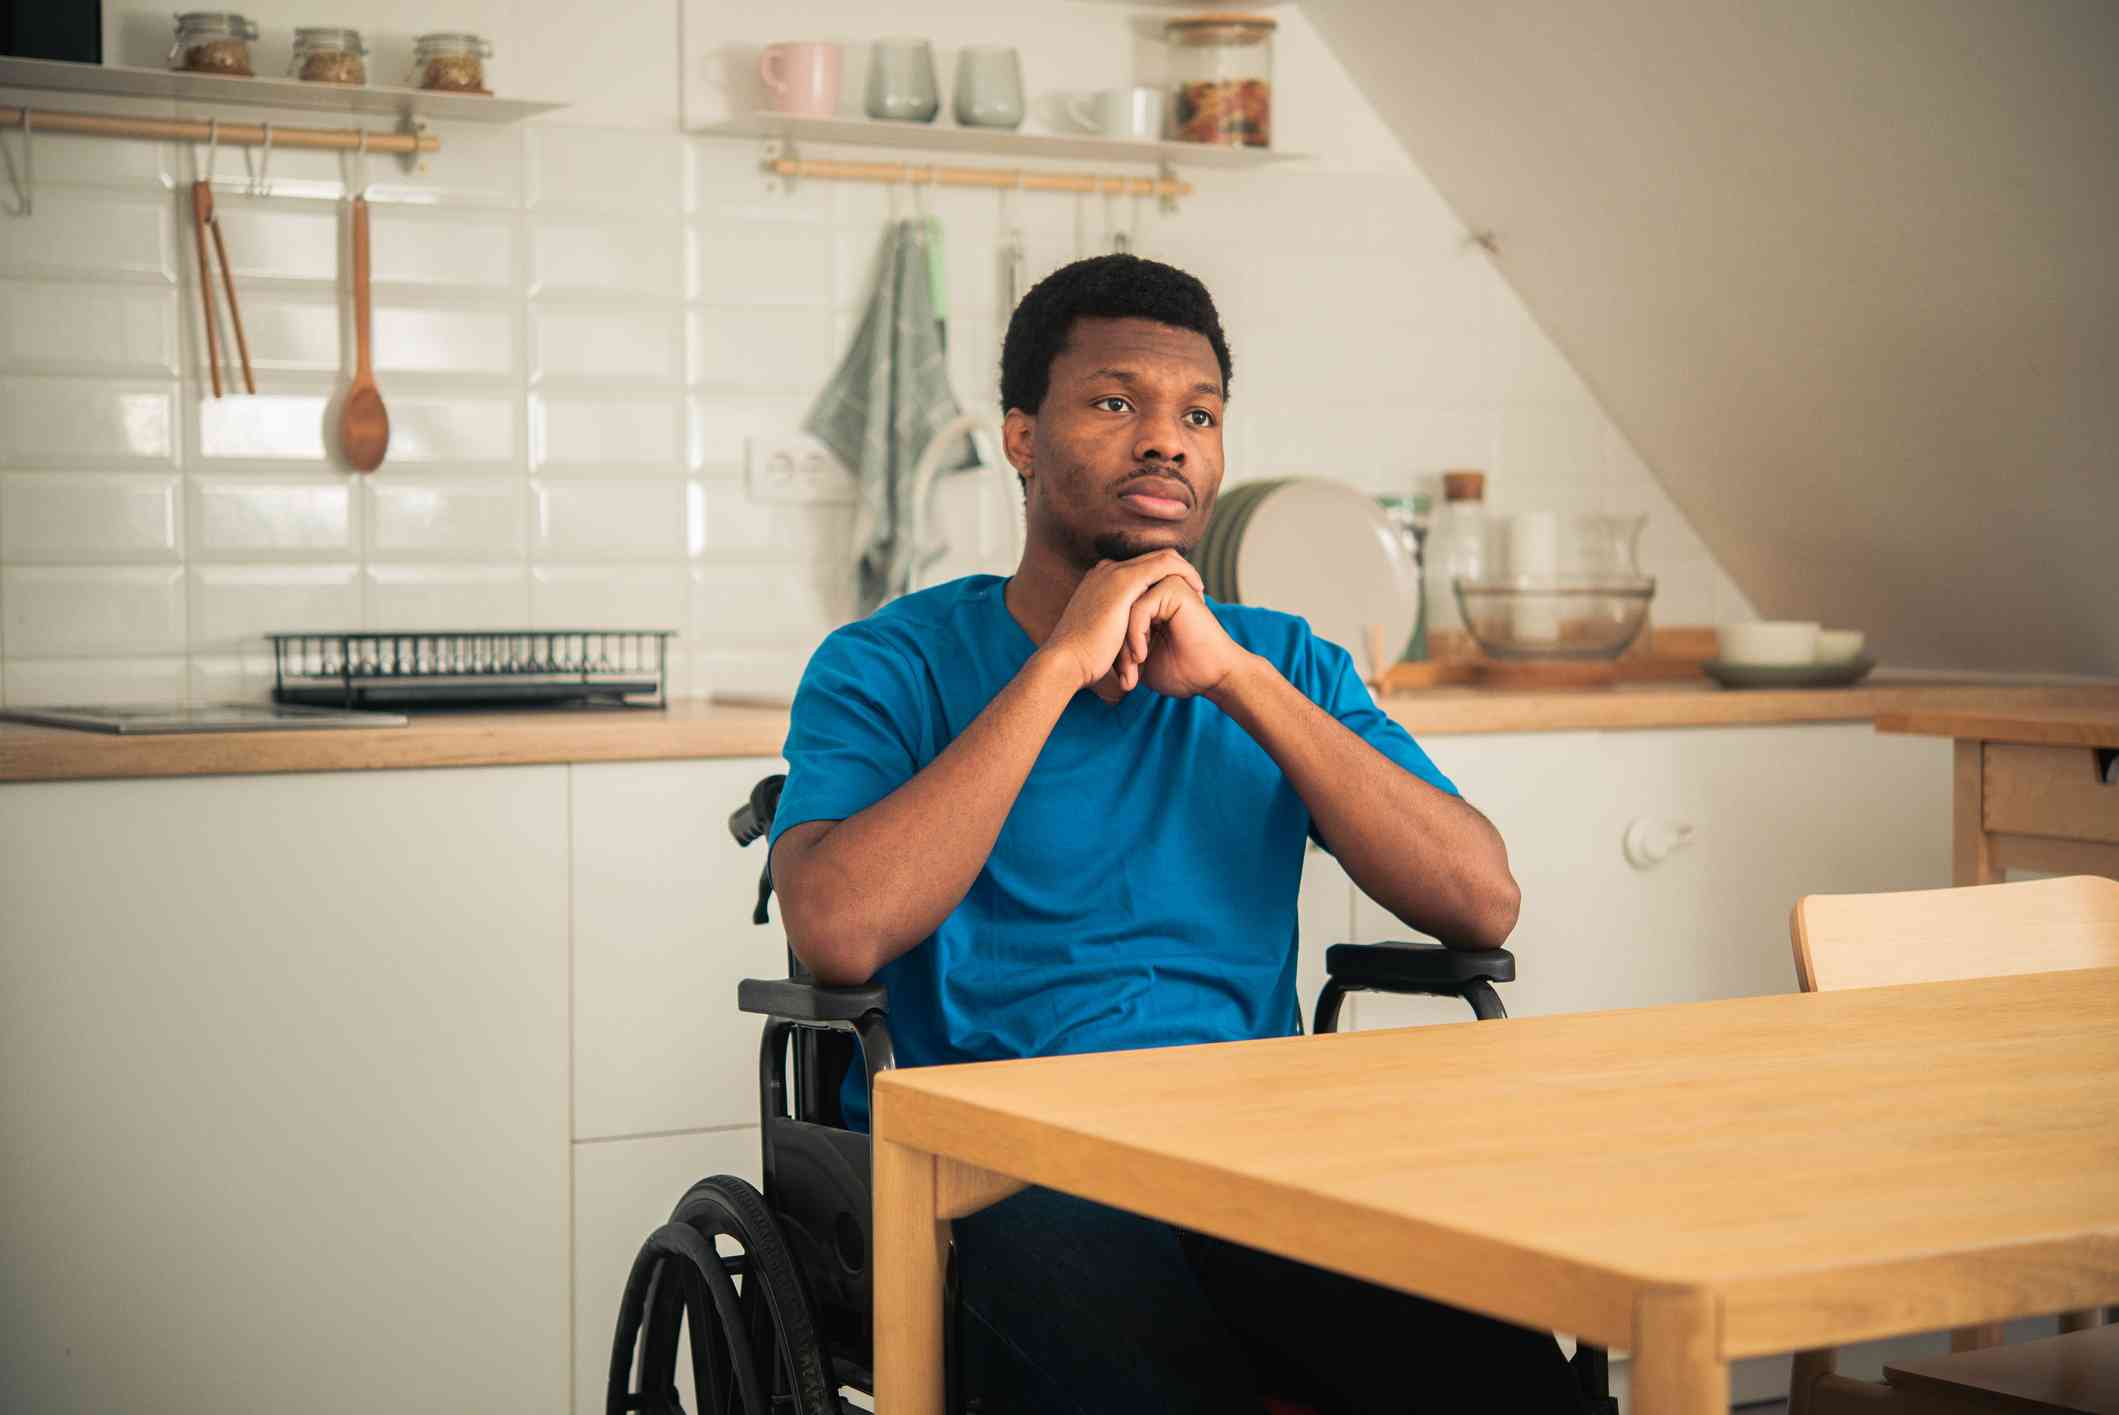 A man in a blue shirt sits in a wheelchair at a wooden table in a kitchen and glances off with a sad expression.